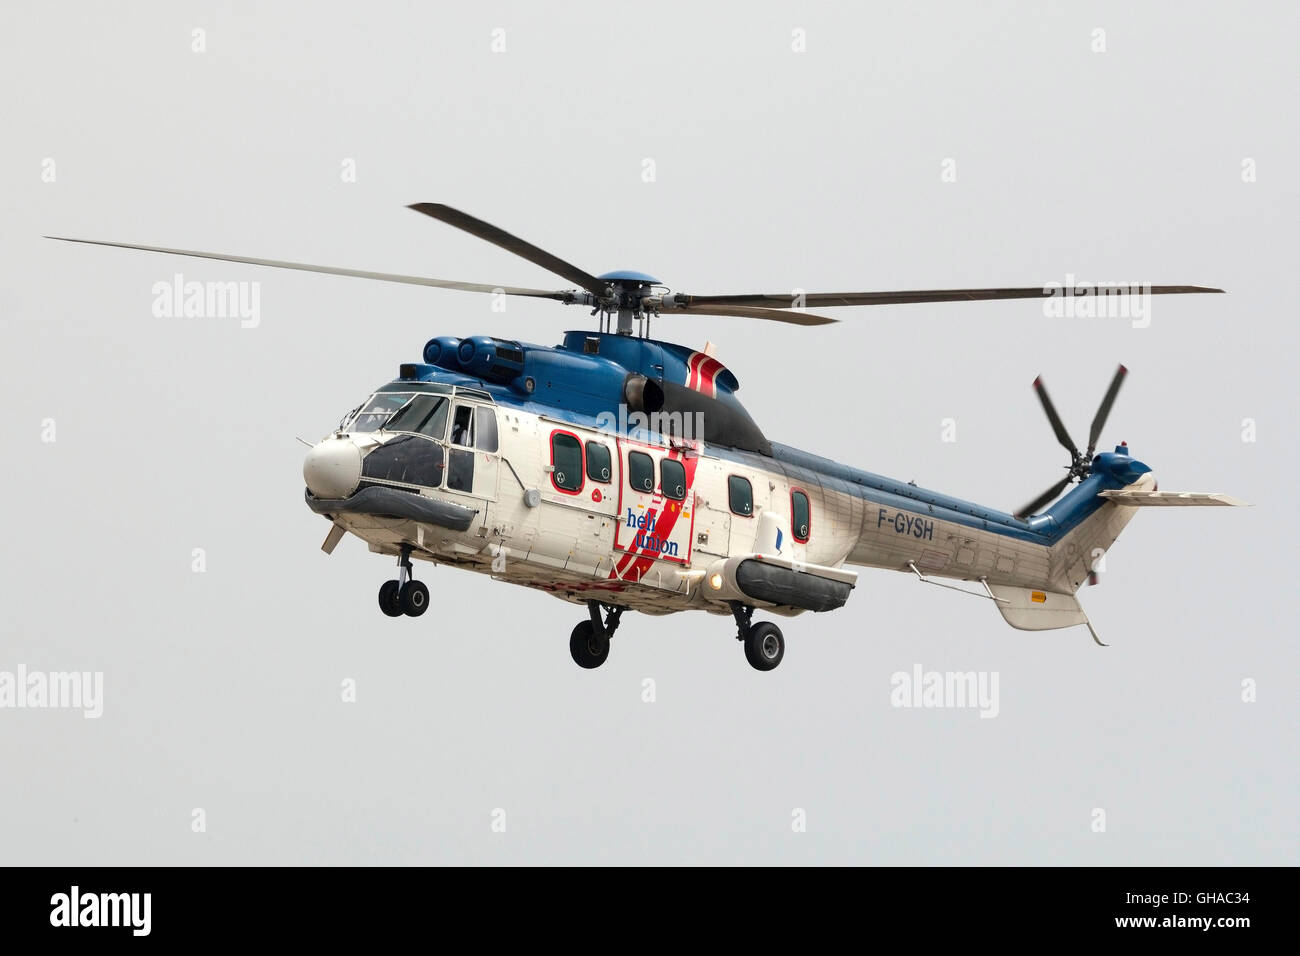 Heli-Union Eurocopter AS-332L1 Super Puma departing on a flight to an oil  rig in the Mediterranean Stock Photo - Alamy